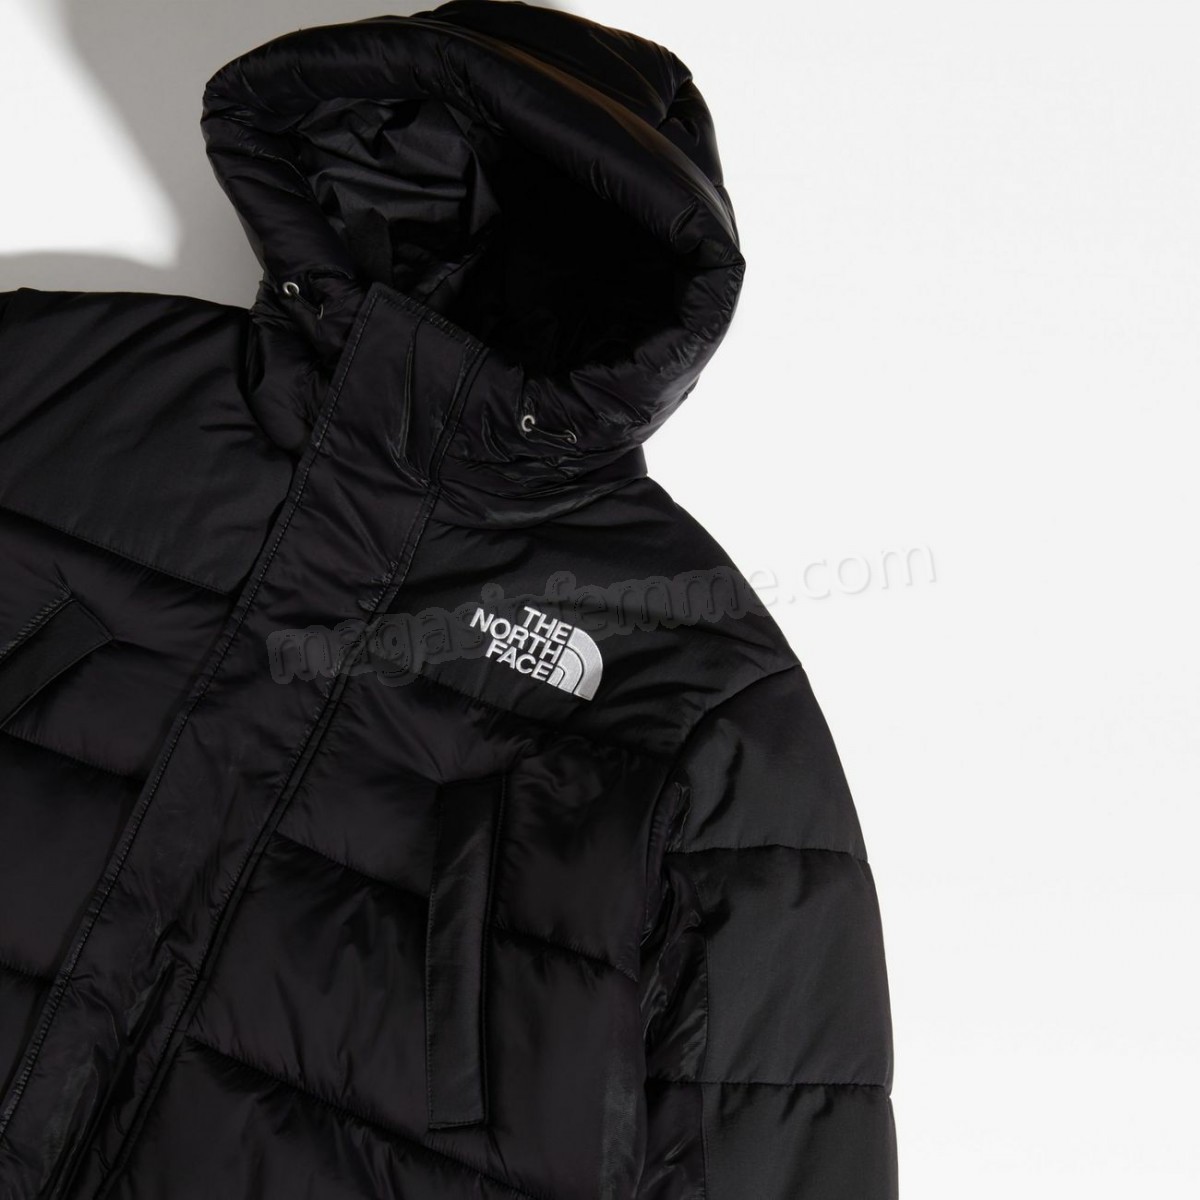 The North Face-mode homme THE NORTH FACE Himalayan Insulated Parka en solde - -23